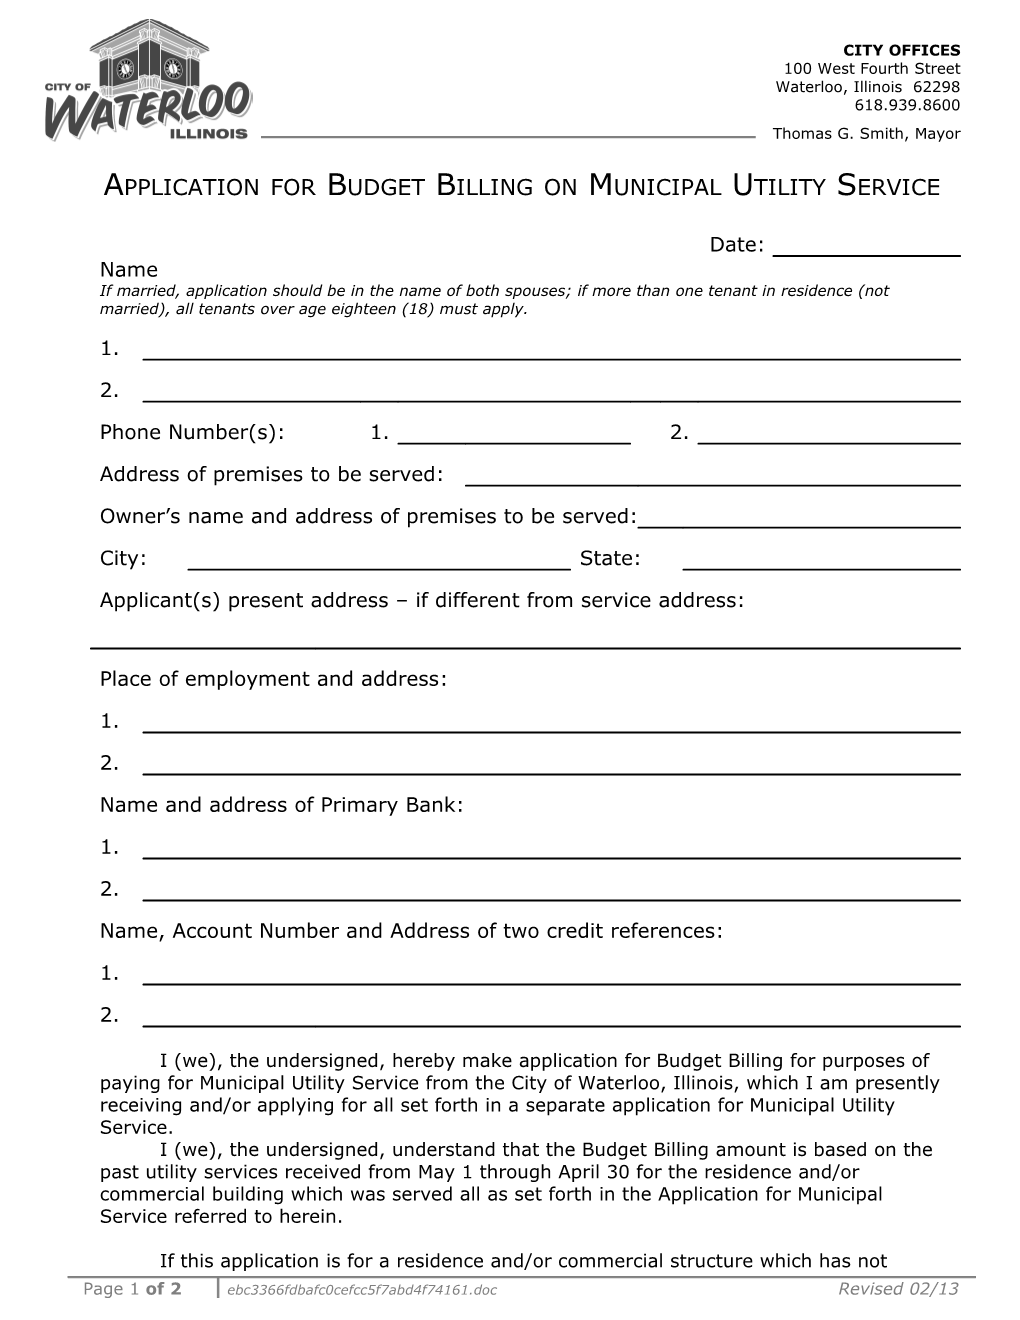 Application for Budget Billing on Municipal Utility Service